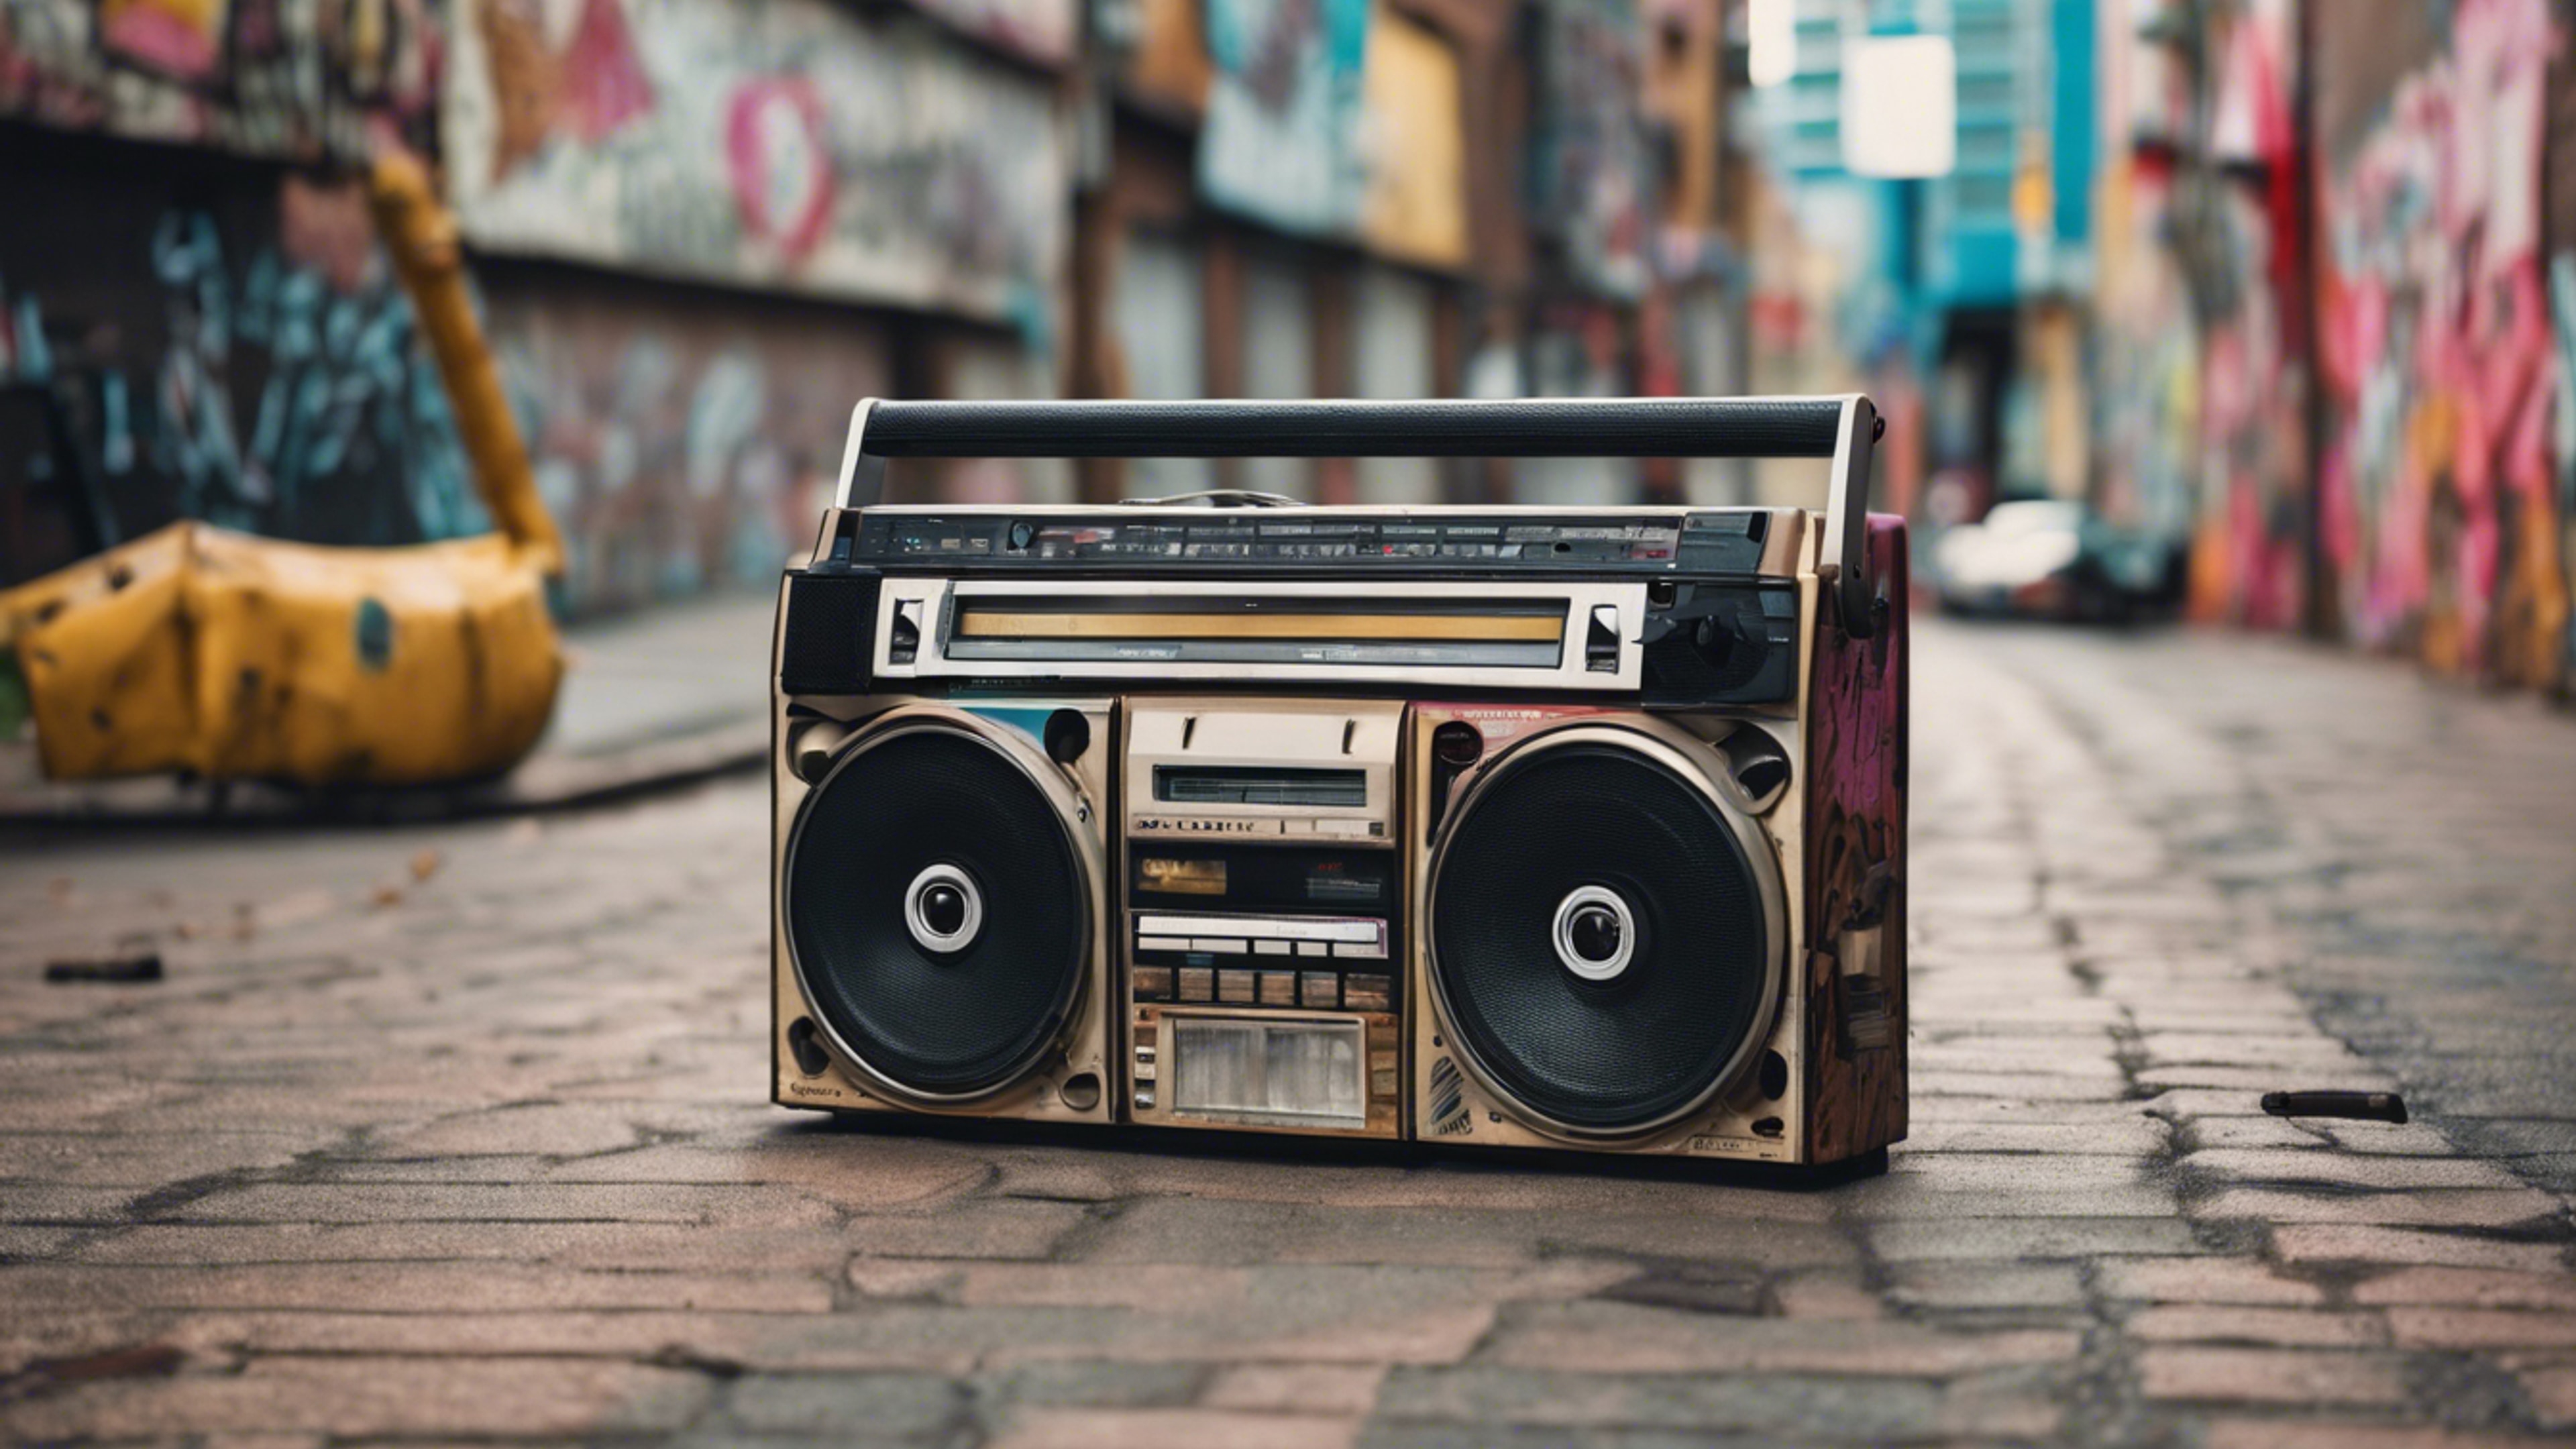 An old school 80s boombox playing cassette tapes on a graffitied street. Тапет[63e13512f9e44708b5c0]